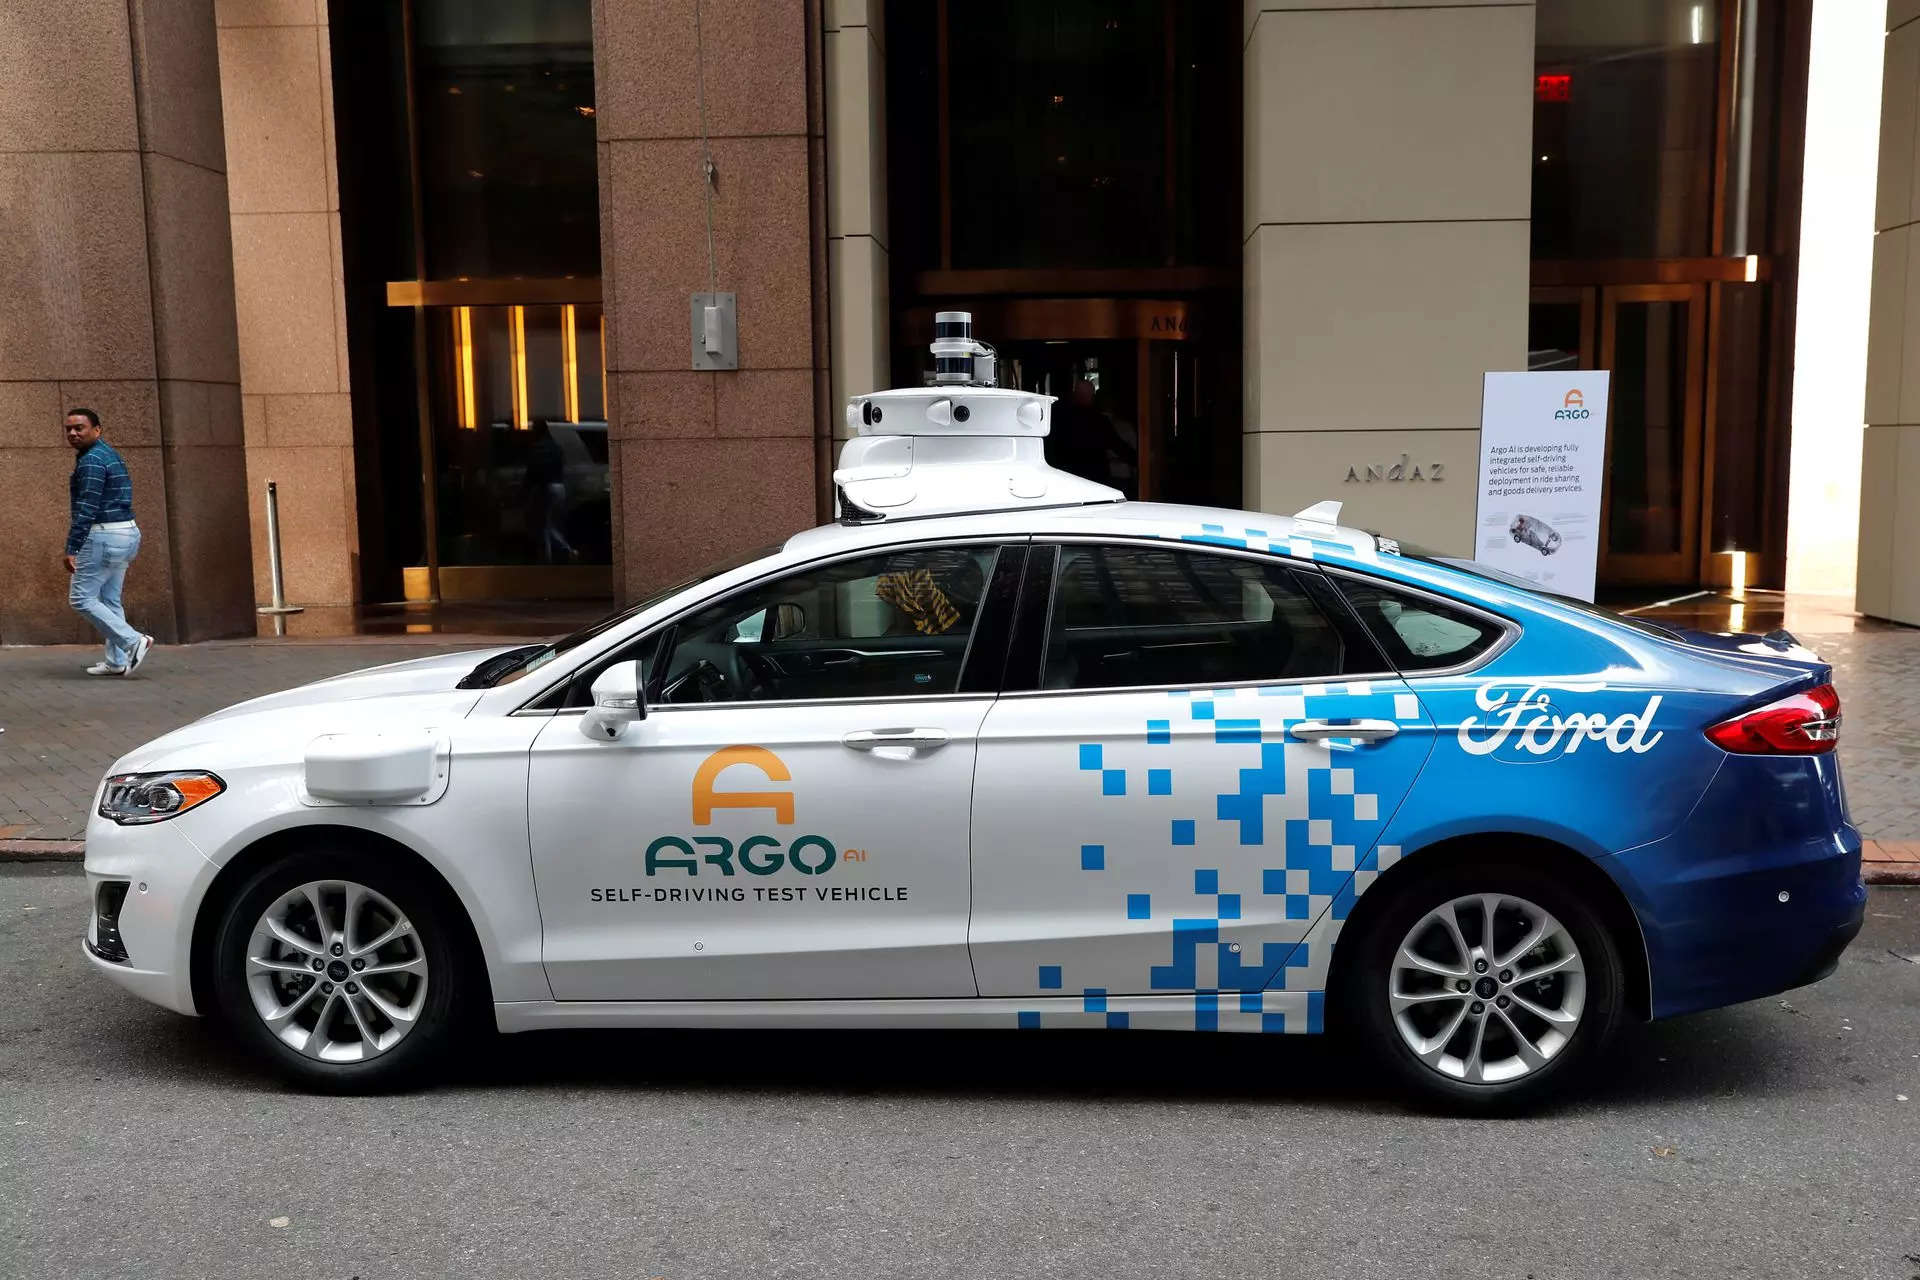 Ford, VW pop the automated-vehicle bubble with Argo AI exit